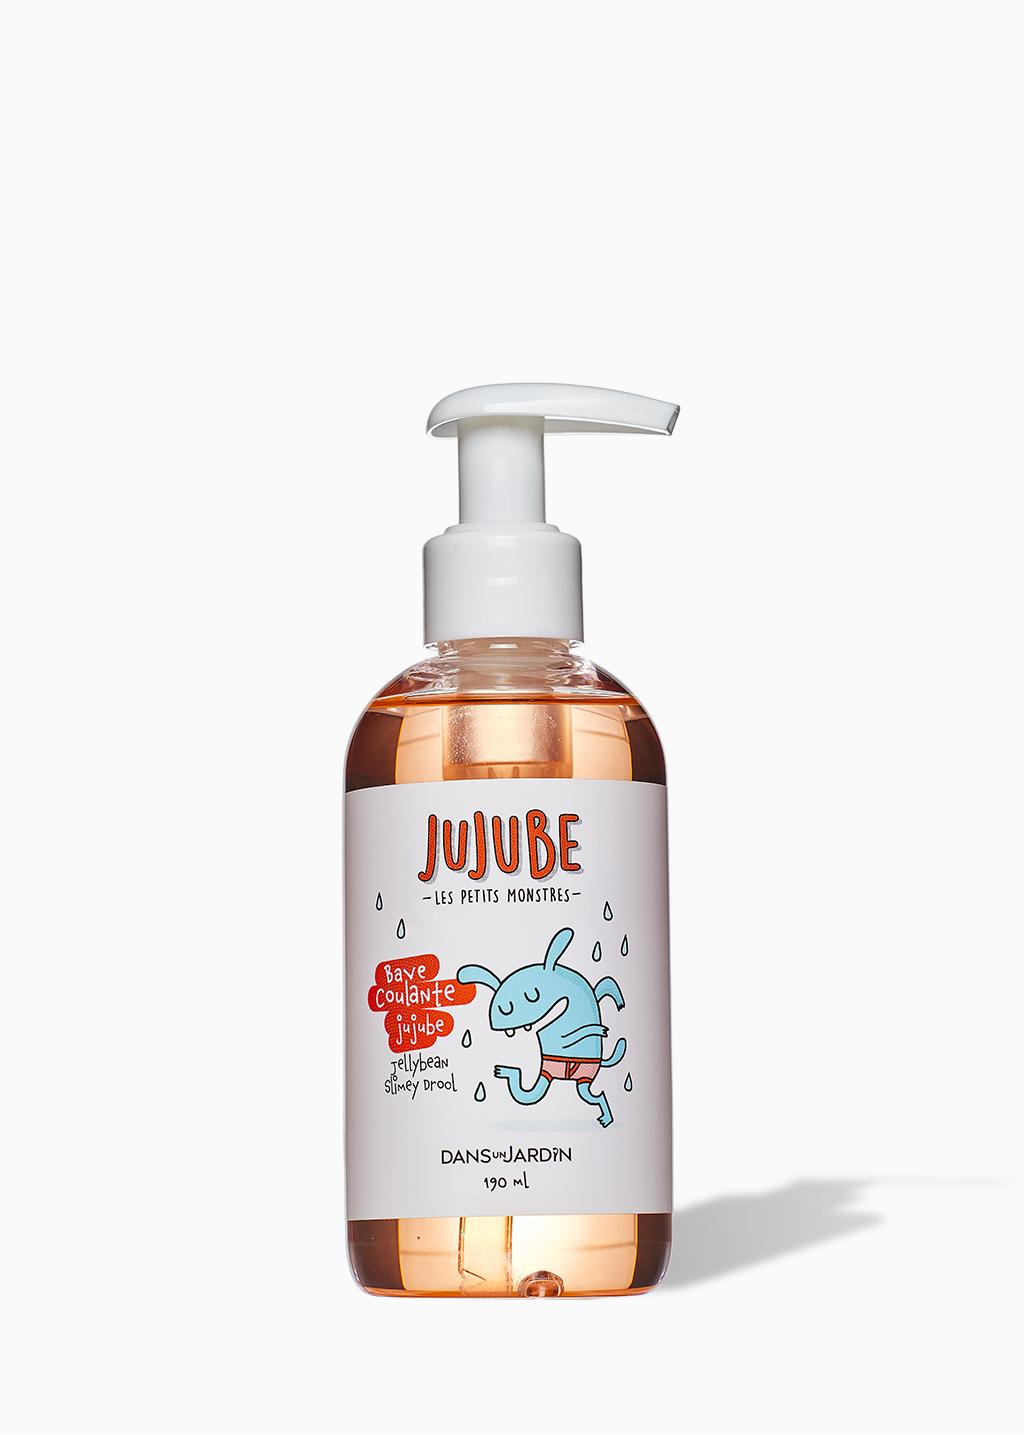 Gel douche bave coulante - JUJUBE